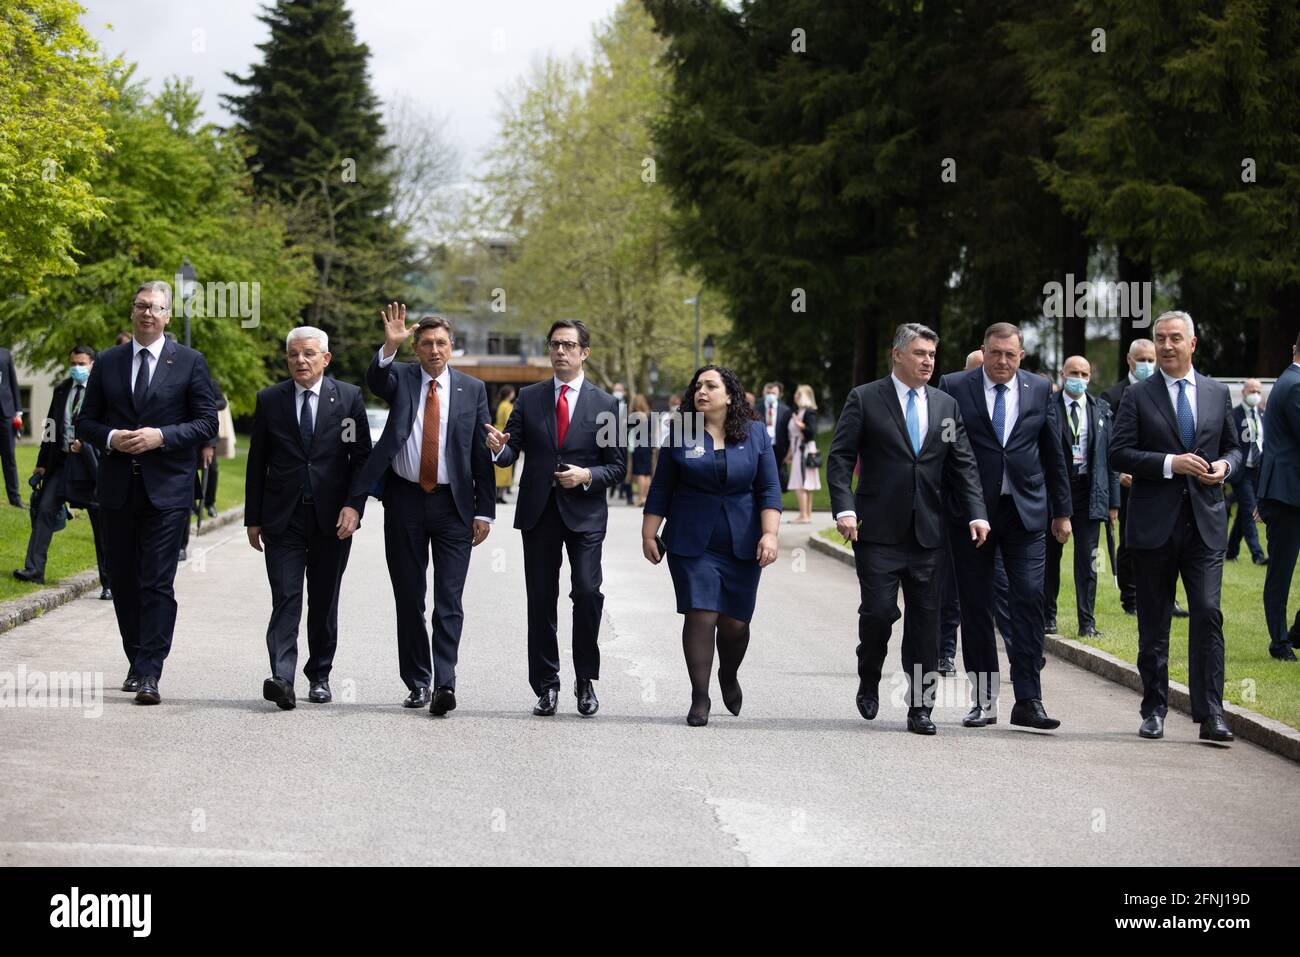 Kranj, Slovenia. 13th May, 2020. Chiefs of state take a walk during the Brdo-Brijuni Process summit. Slovenian president Borut Pahor hosted a summit of the Brdo-Brijuni Process in Brdo pri Kranju where he met the presidents of Albania, Croatia, Serbia, North Macedonia, Montenegro, Kosovo and the presiding trio of Bosnia and Herzegovina, marking the 10th anniversary of the initiative. Credit: SOPA Images Limited/Alamy Live News Stock Photo